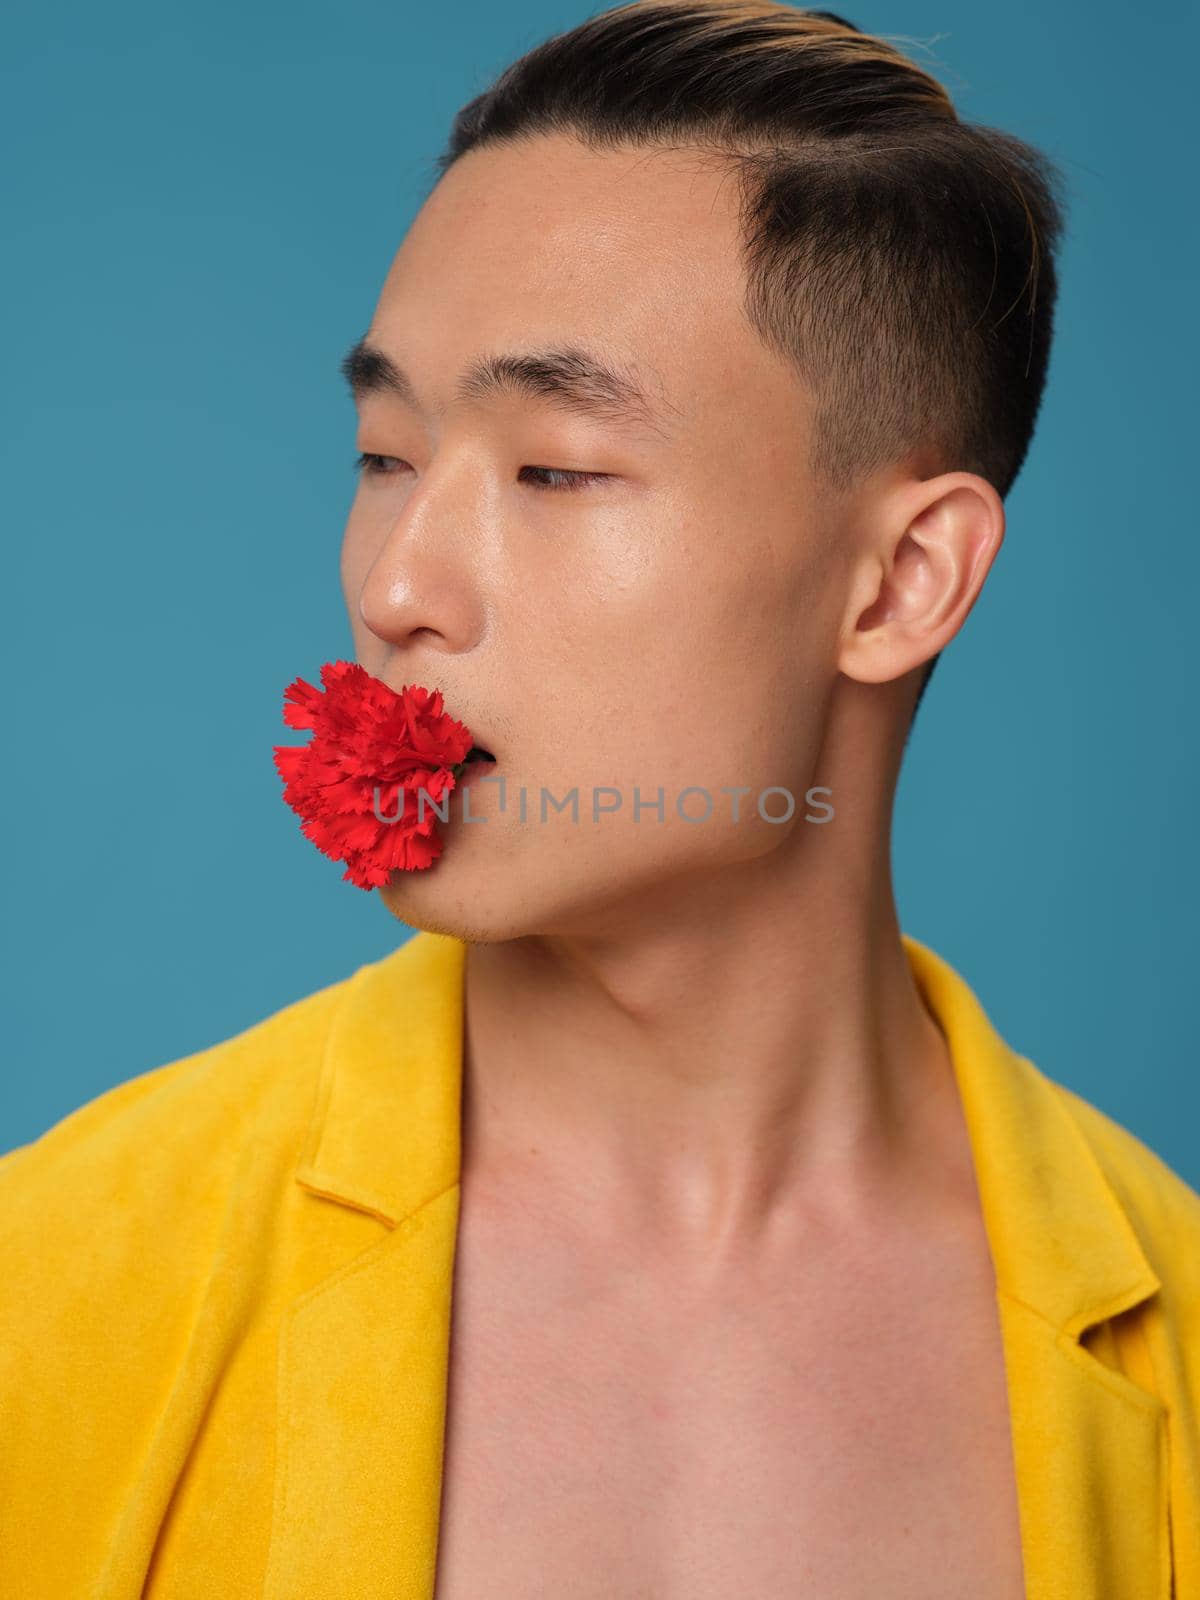 Korean appearance guy with a flower in his mouth on a blue background and a yellow jacket side view portrait by SHOTPRIME